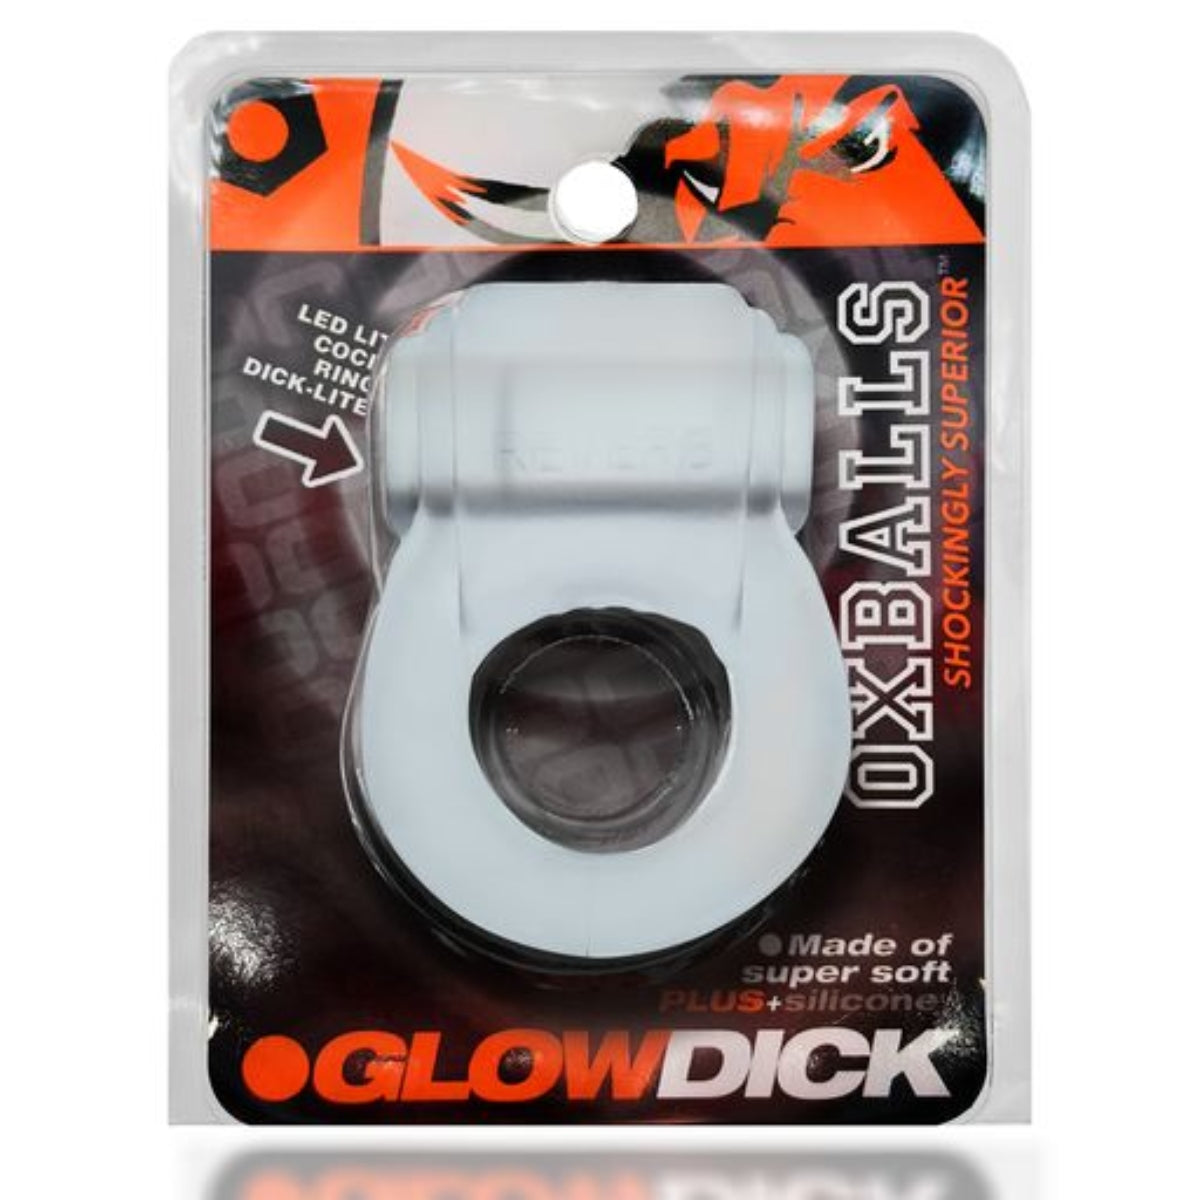 Glowdick LED Clear Ice Cockring - Illuminate Your Intimate Moments!